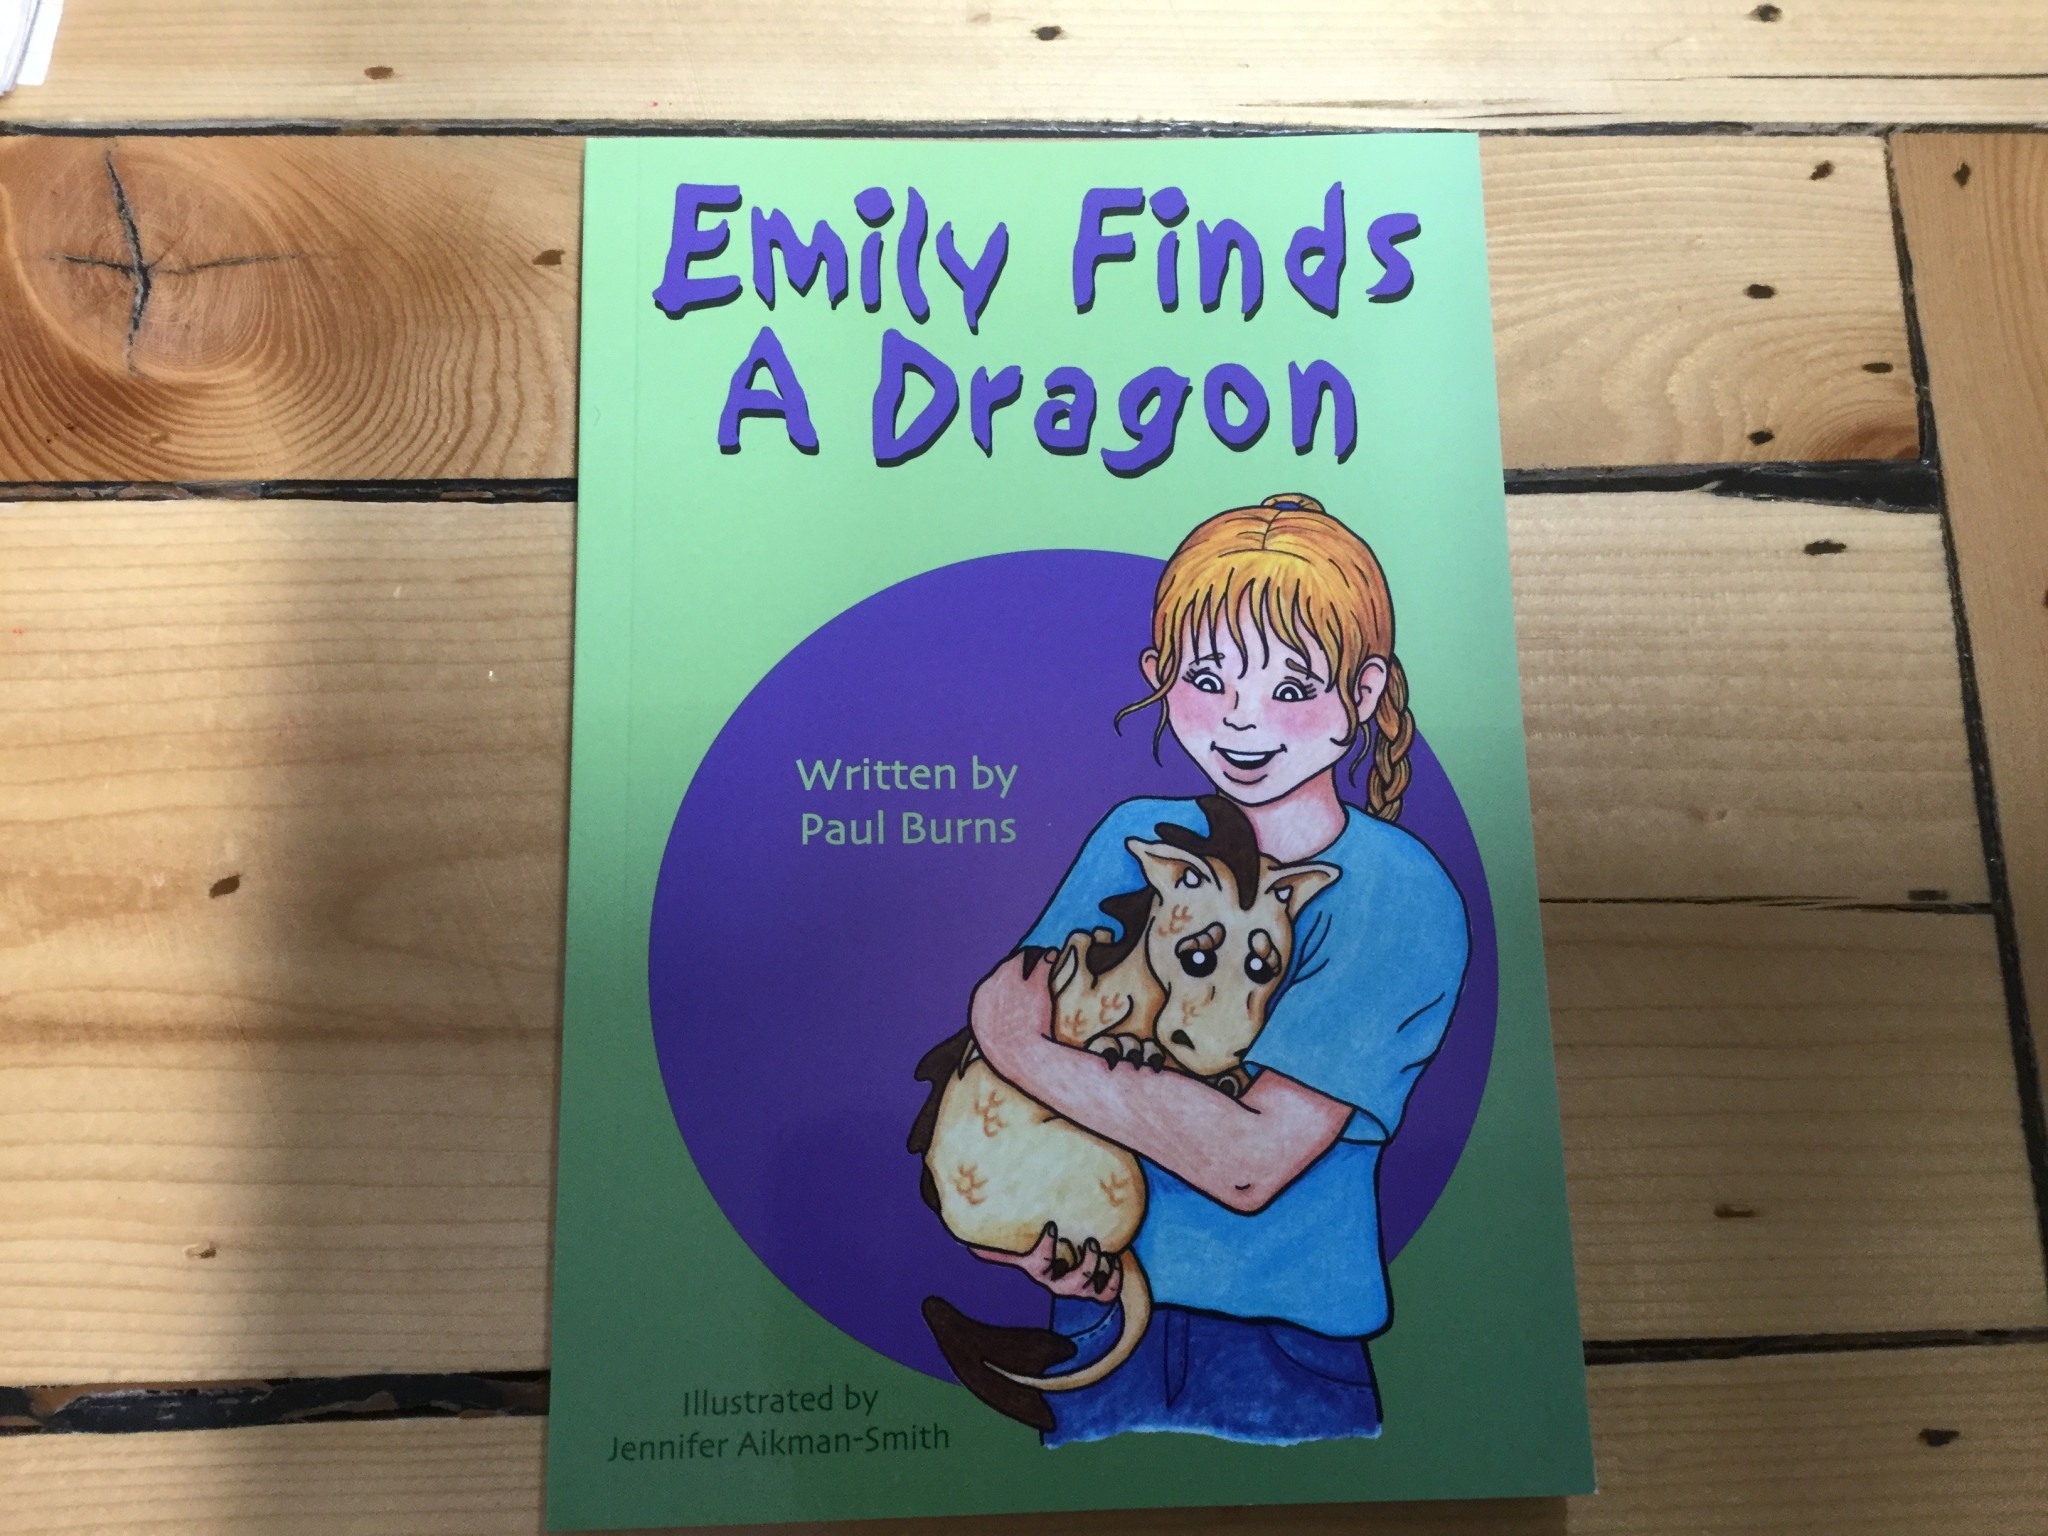 EMILY FINDS A DRAGON